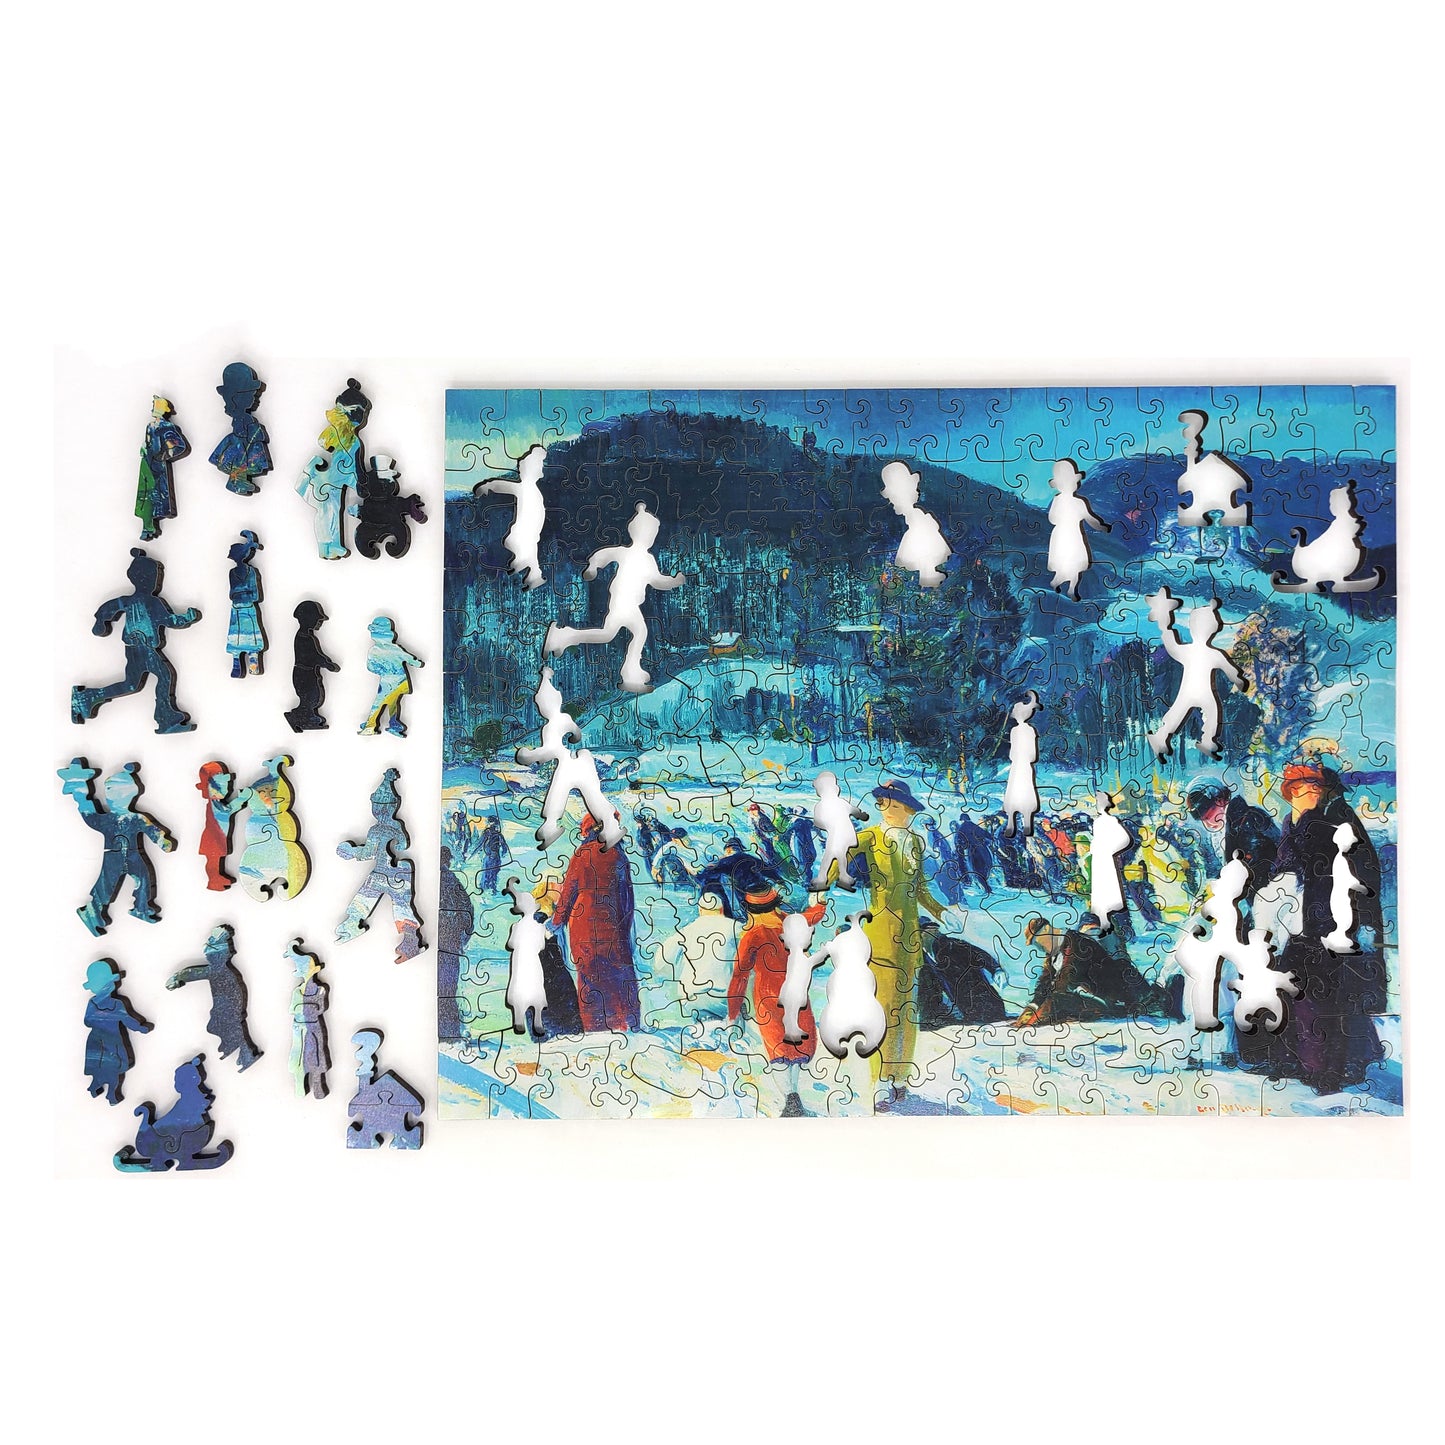 Wooden Jigsaw Puzzle with Uniquely Shaped Pieces for Adults - 215 Pieces - Love of Winter